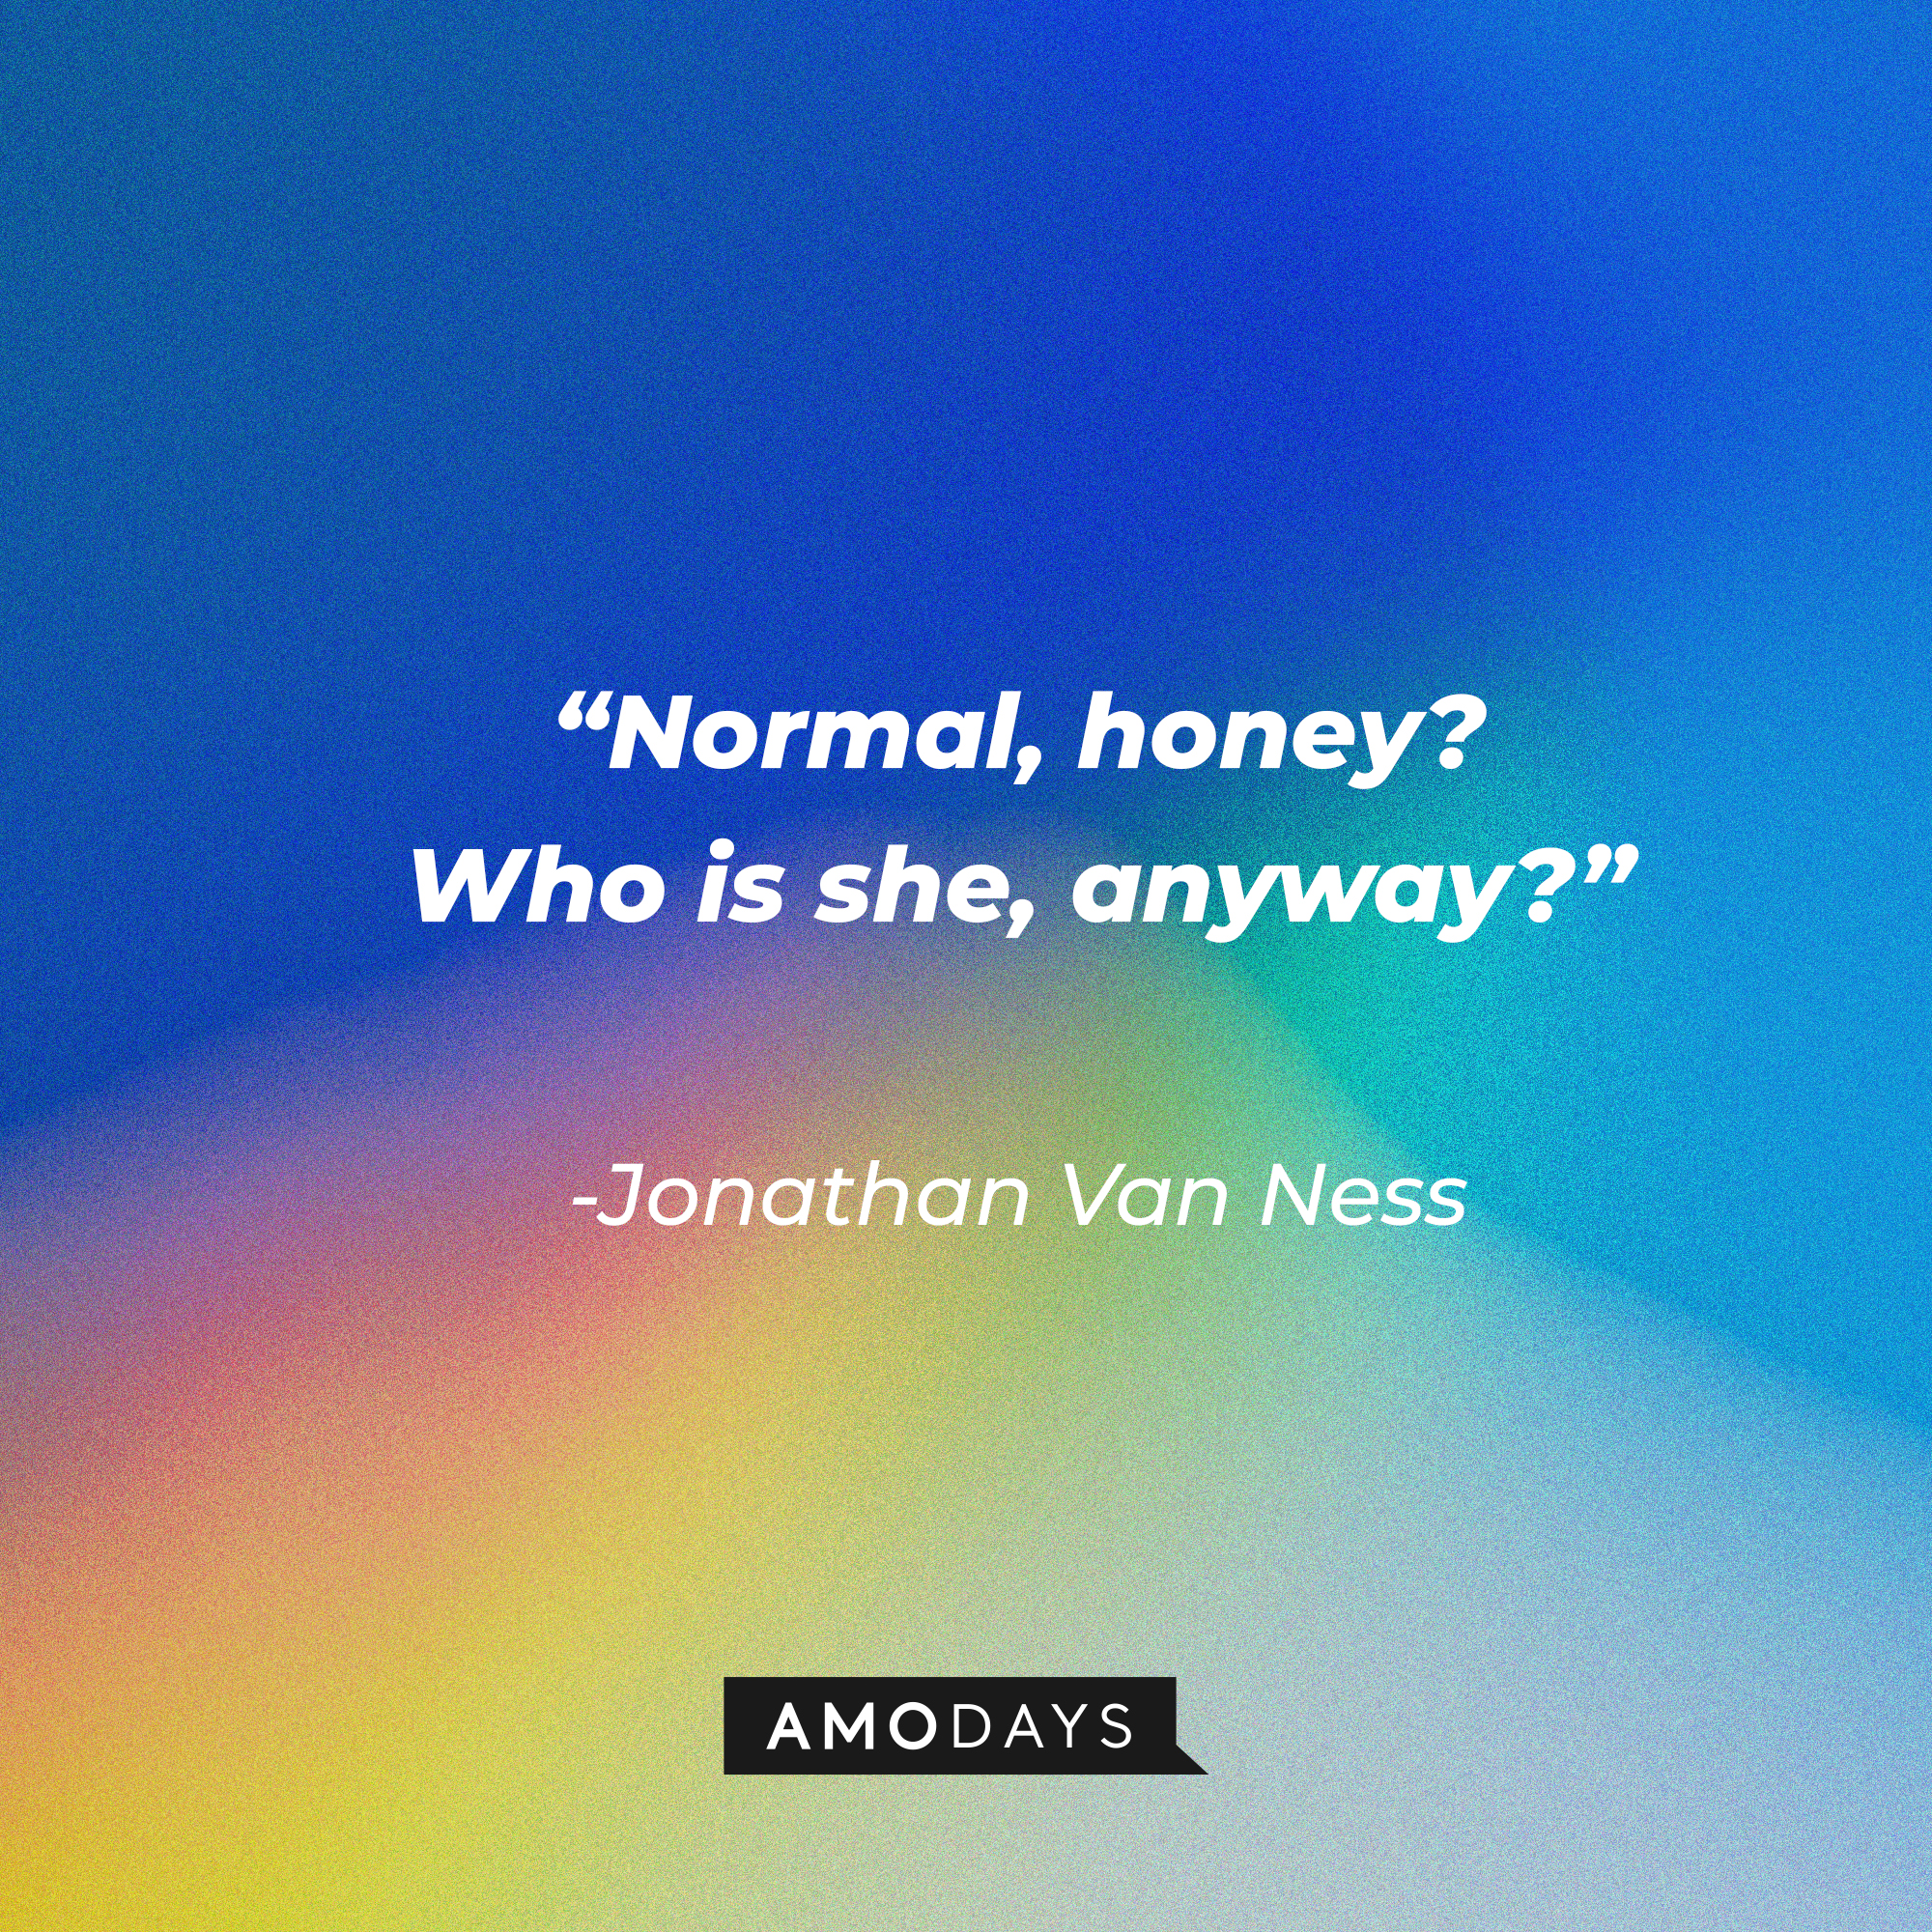 Jonathan Van Ness’s quote: “Normal, honey? Who is she, anyway?” | Source: AmoDays